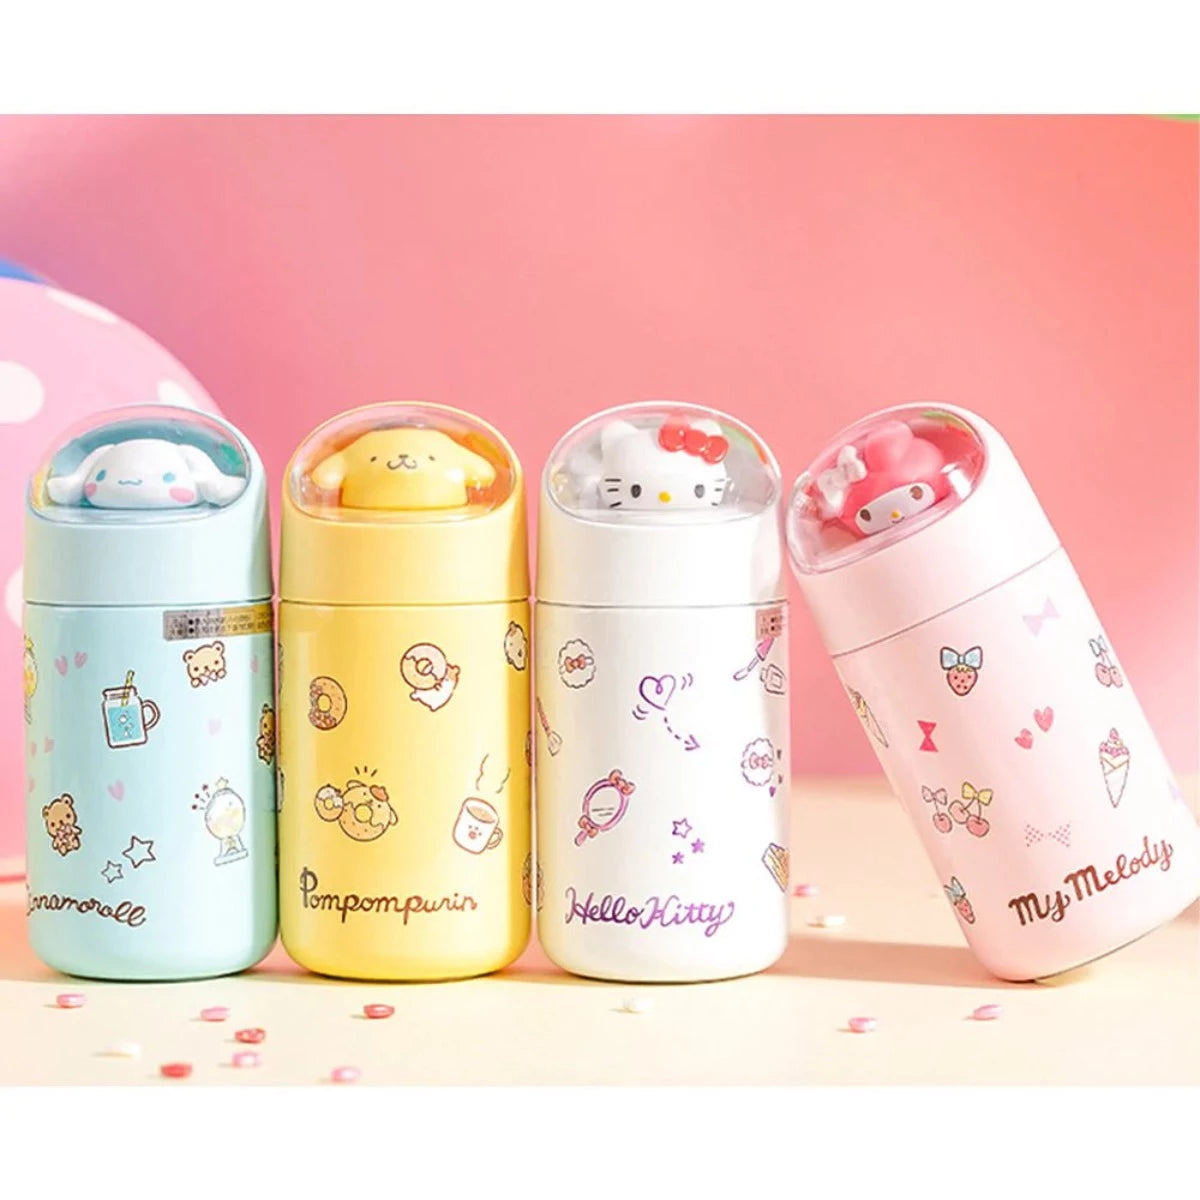 My Melody Thermo Bottle 280ml